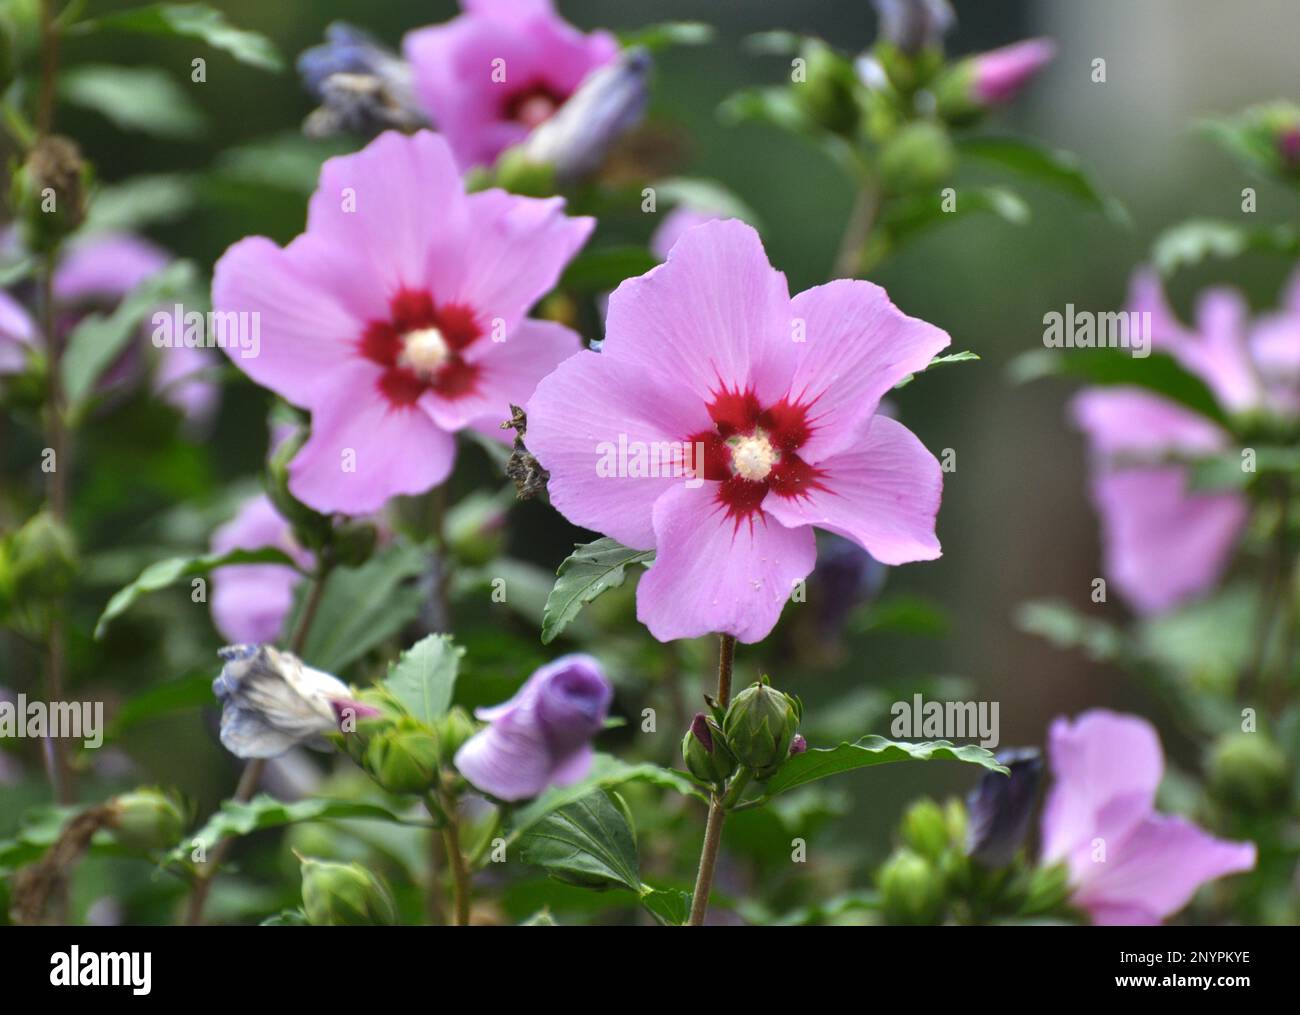 In summer, the hibiscus bush blooms in nature Stock Photo